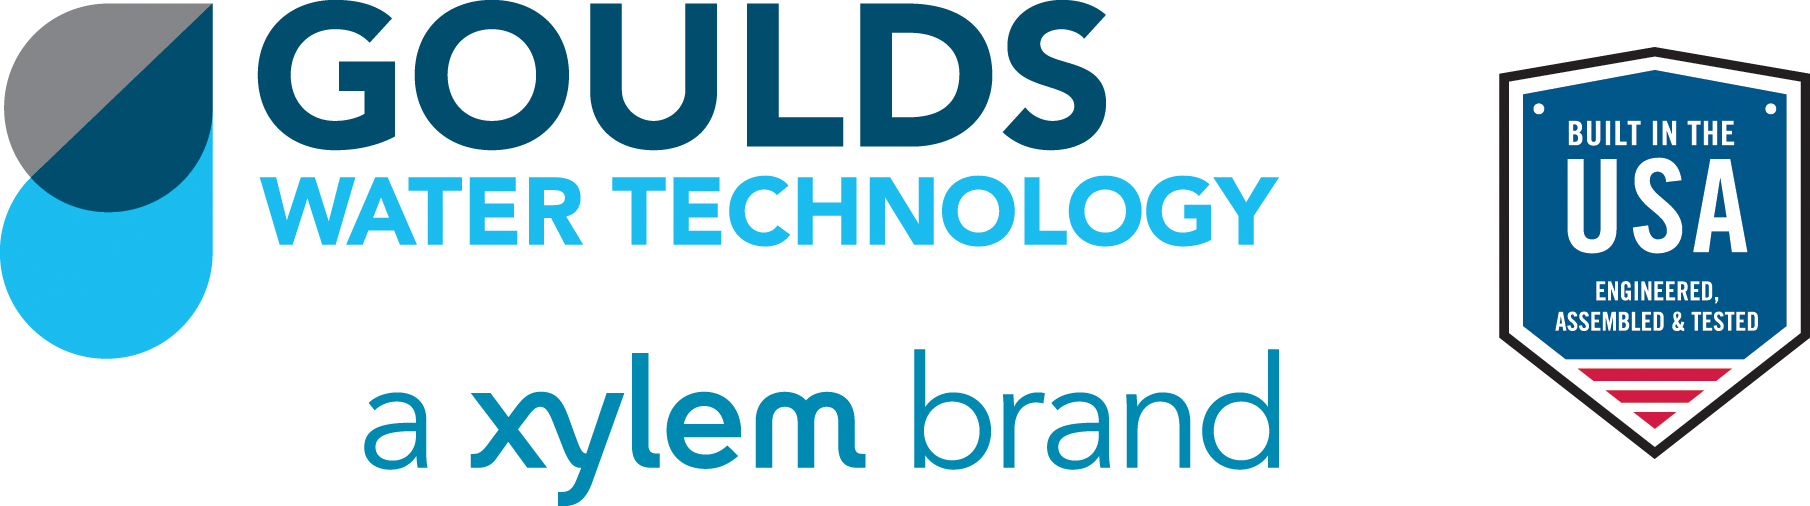 Goulds Water Technology logo - a xylem brand - Built in the USA